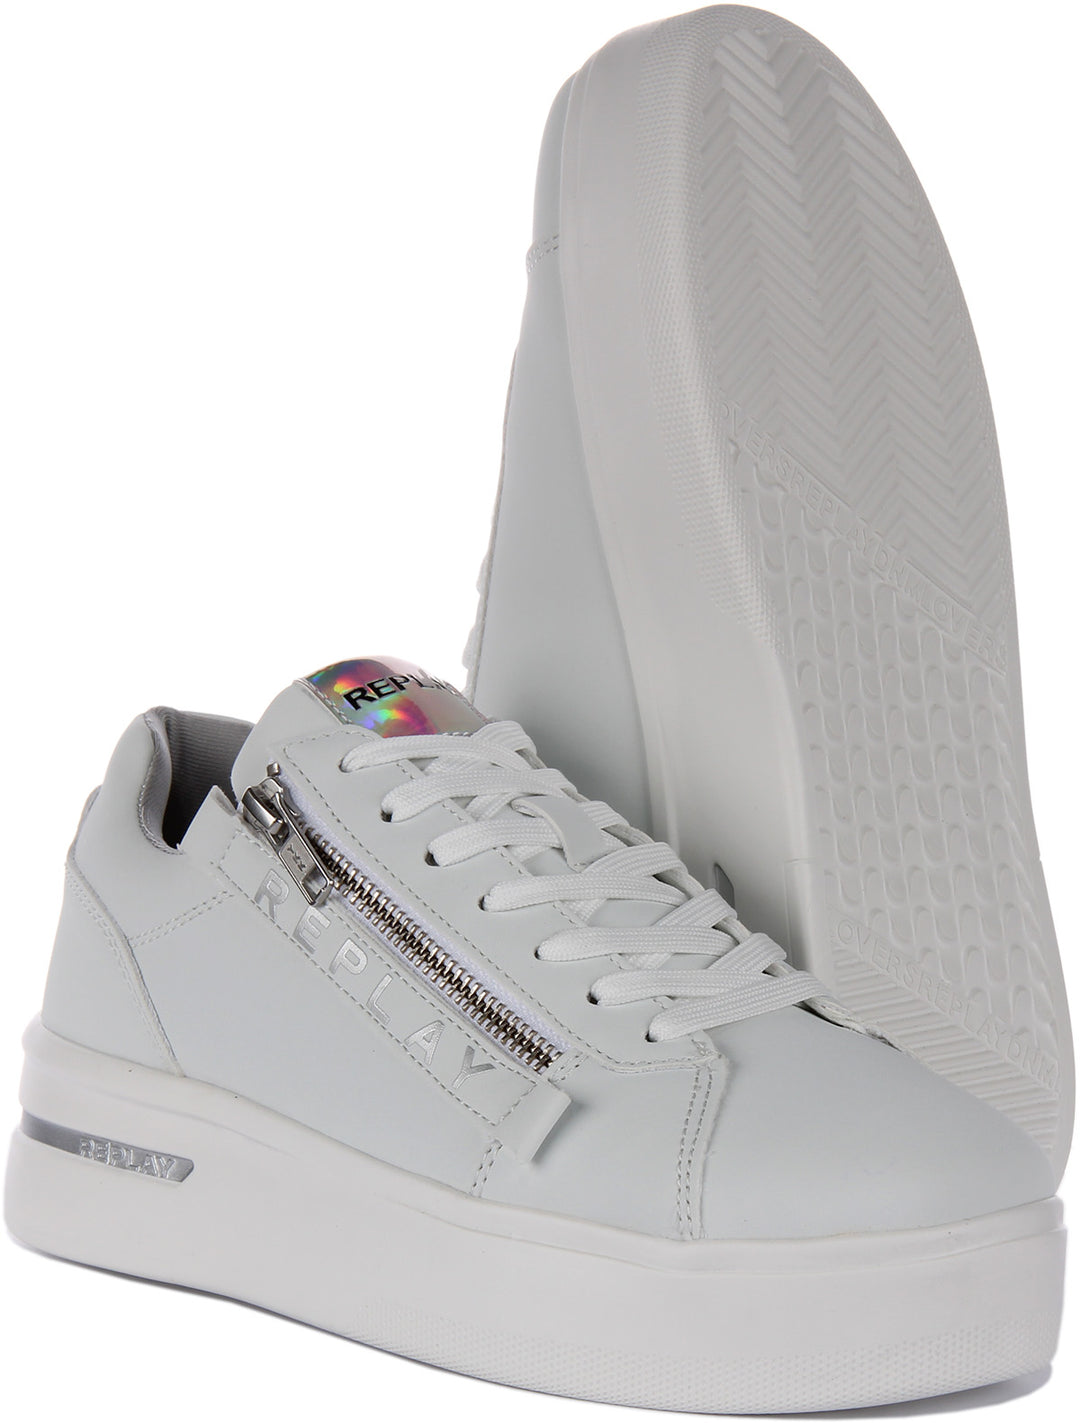 Replay Shoes Trainers Gr.40, New